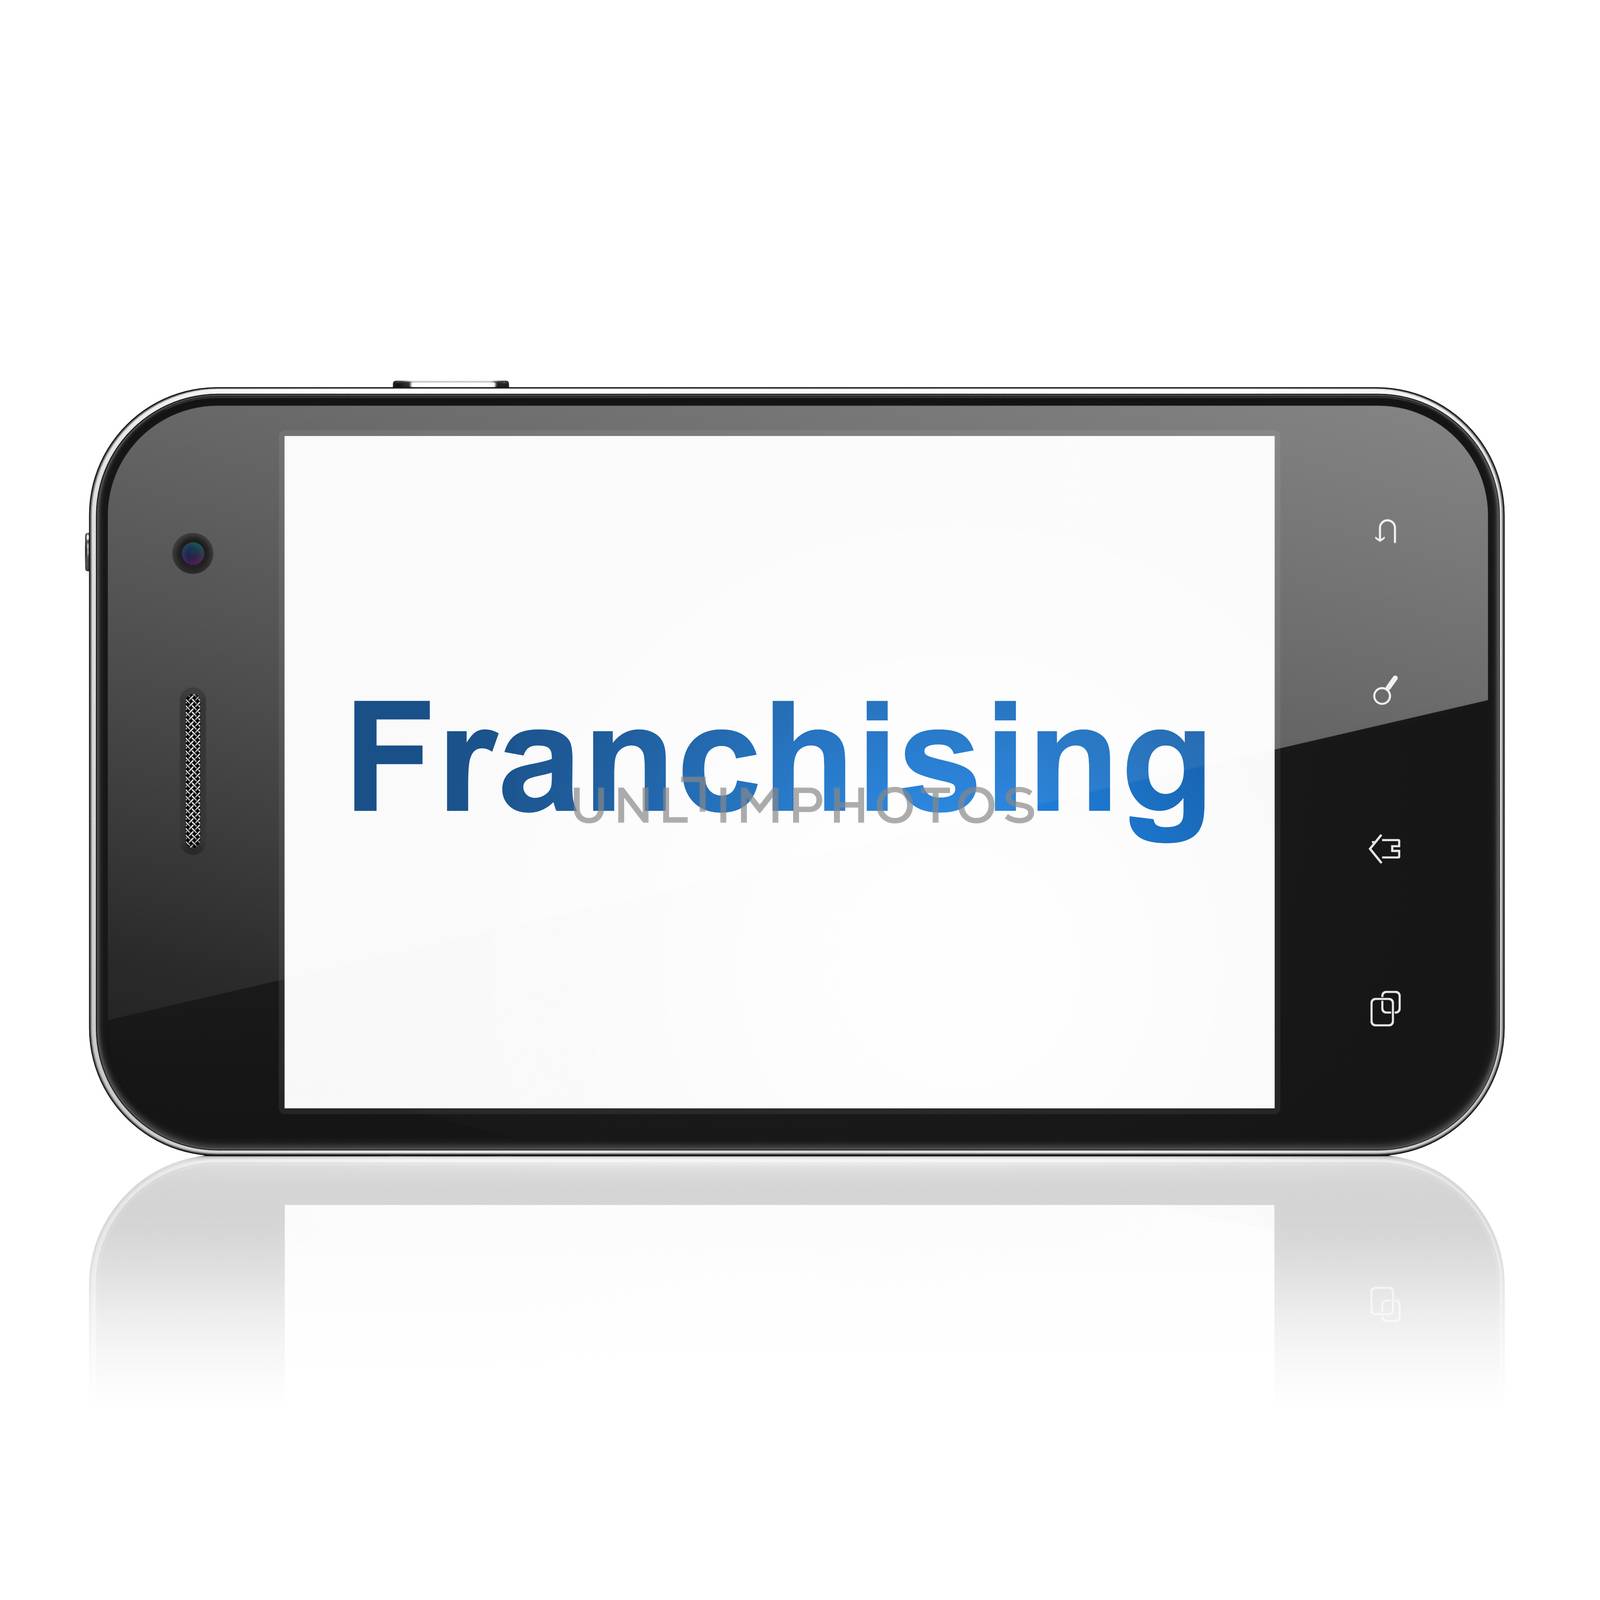 Business concept: Franchising on smartphone by maxkabakov